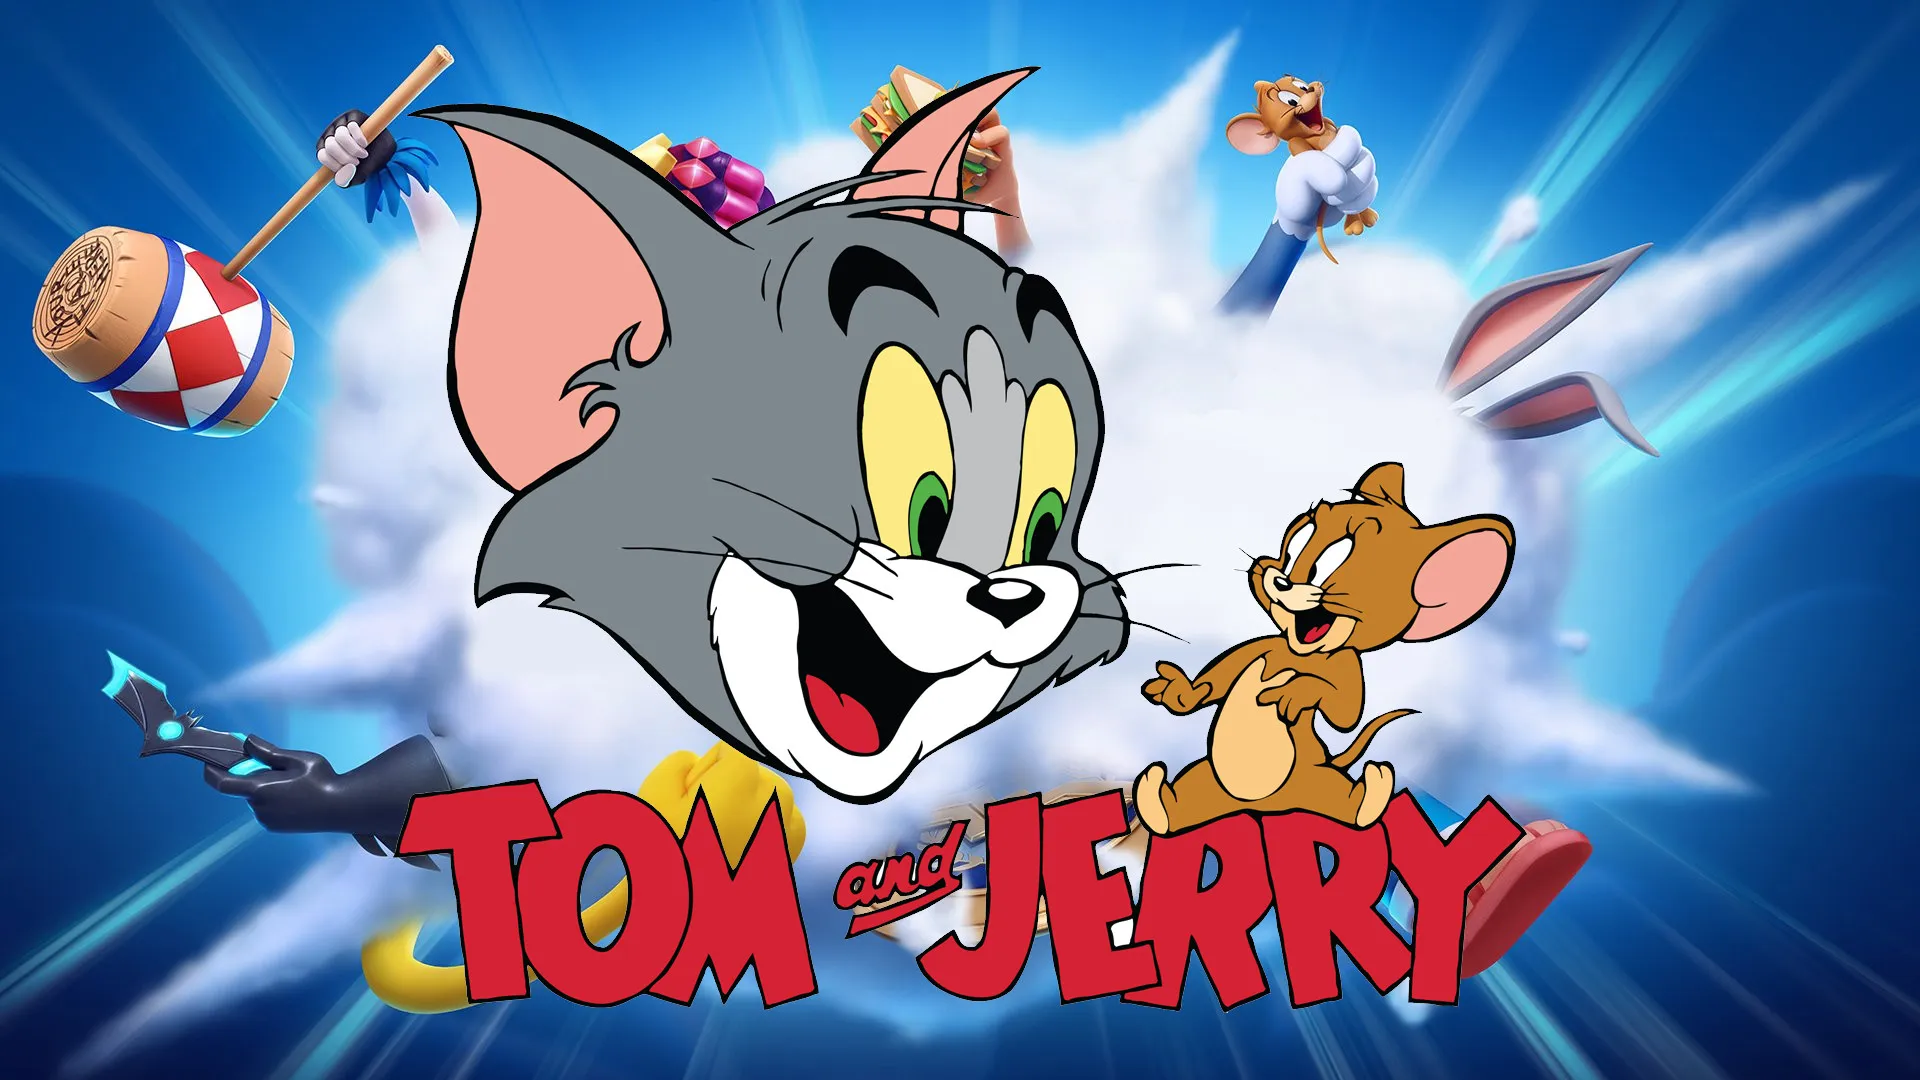 One more time Tom and Jerry